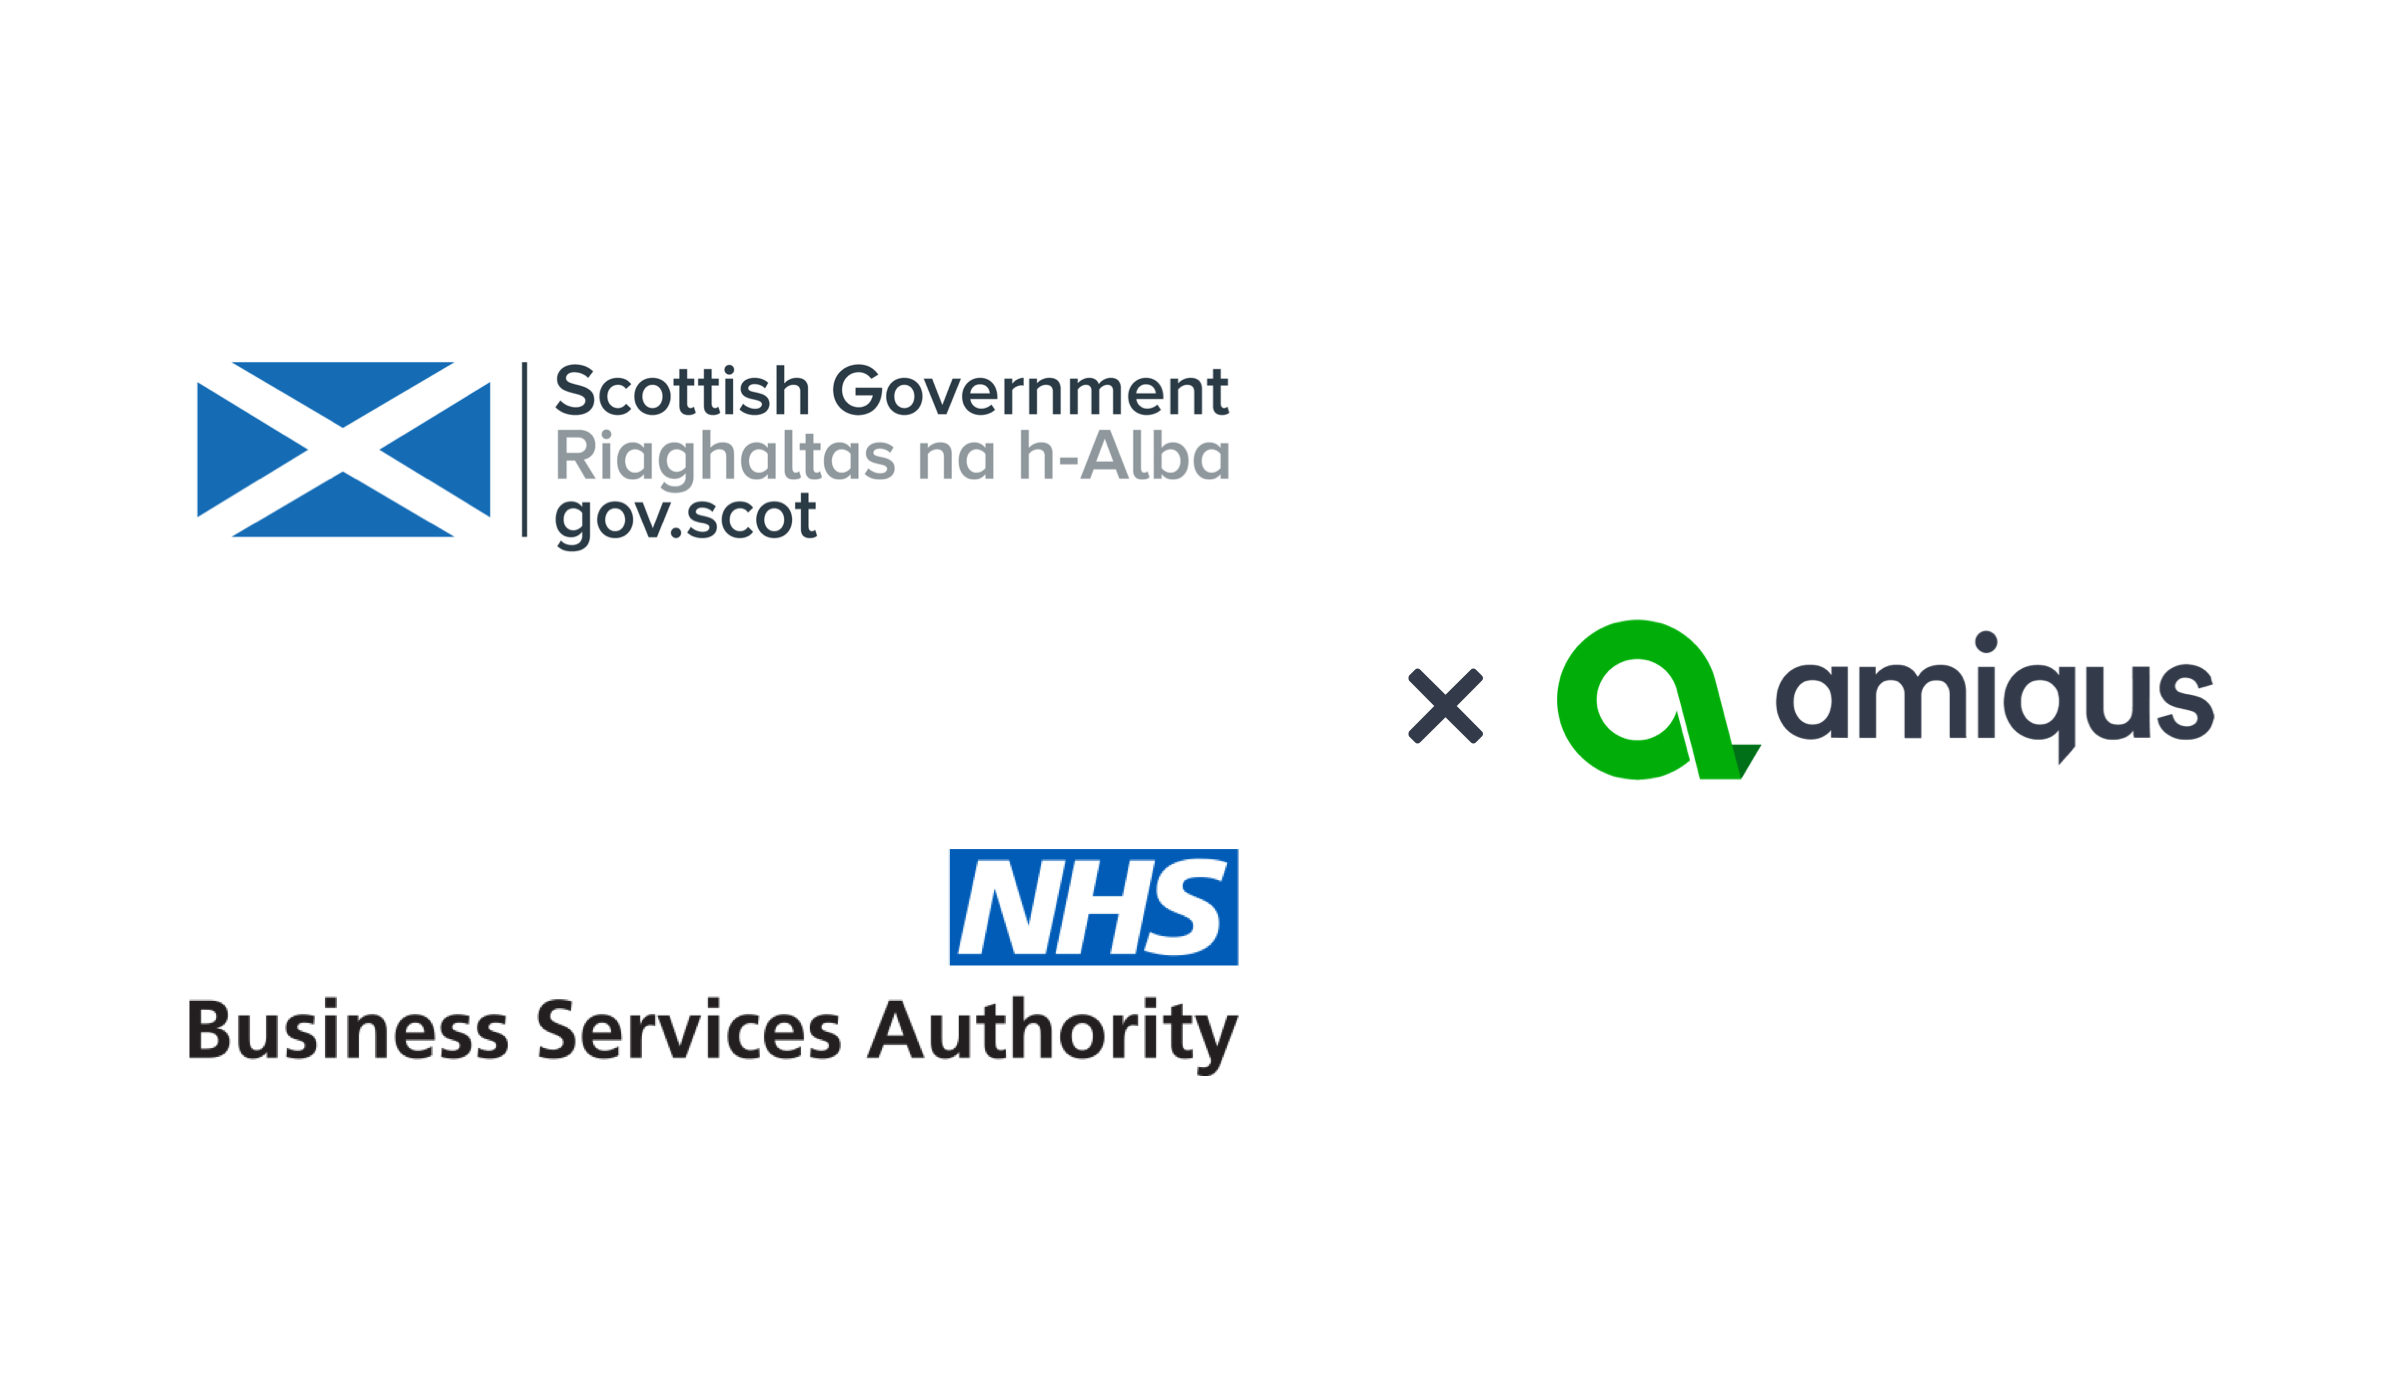 Amiqus enters public sector with Scottish Government and NHS contracts